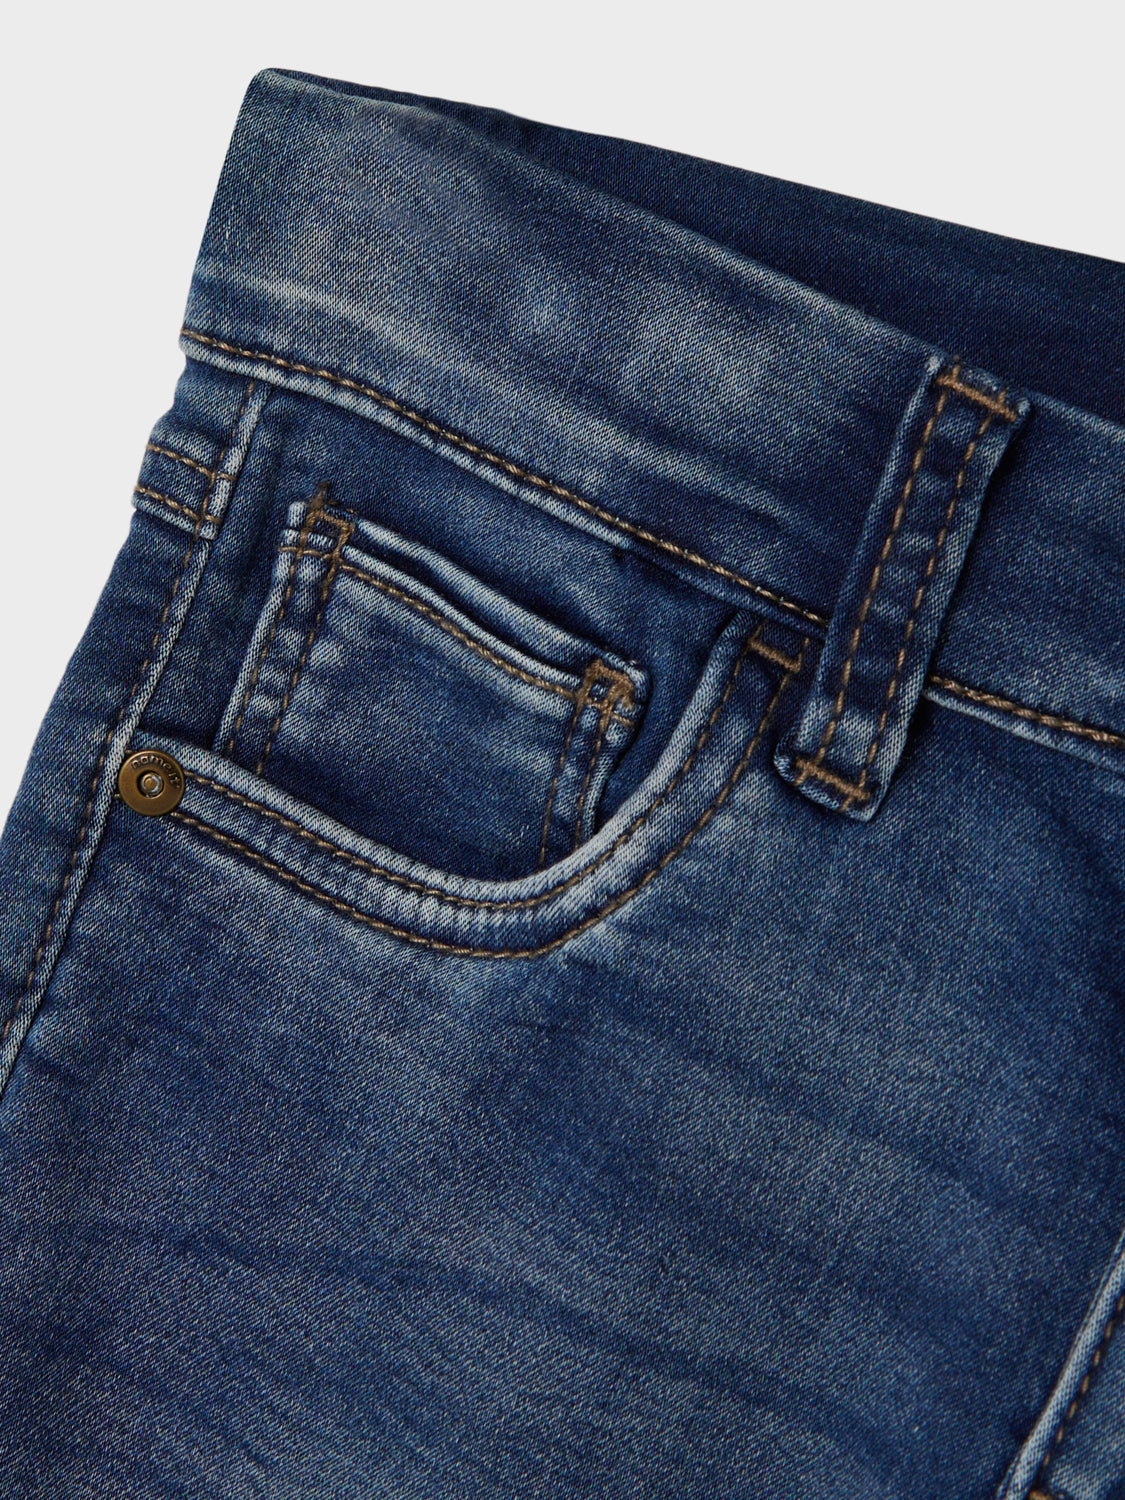 NKMTHEO Jeans Blue It - Light Denim – Name Aabenraa